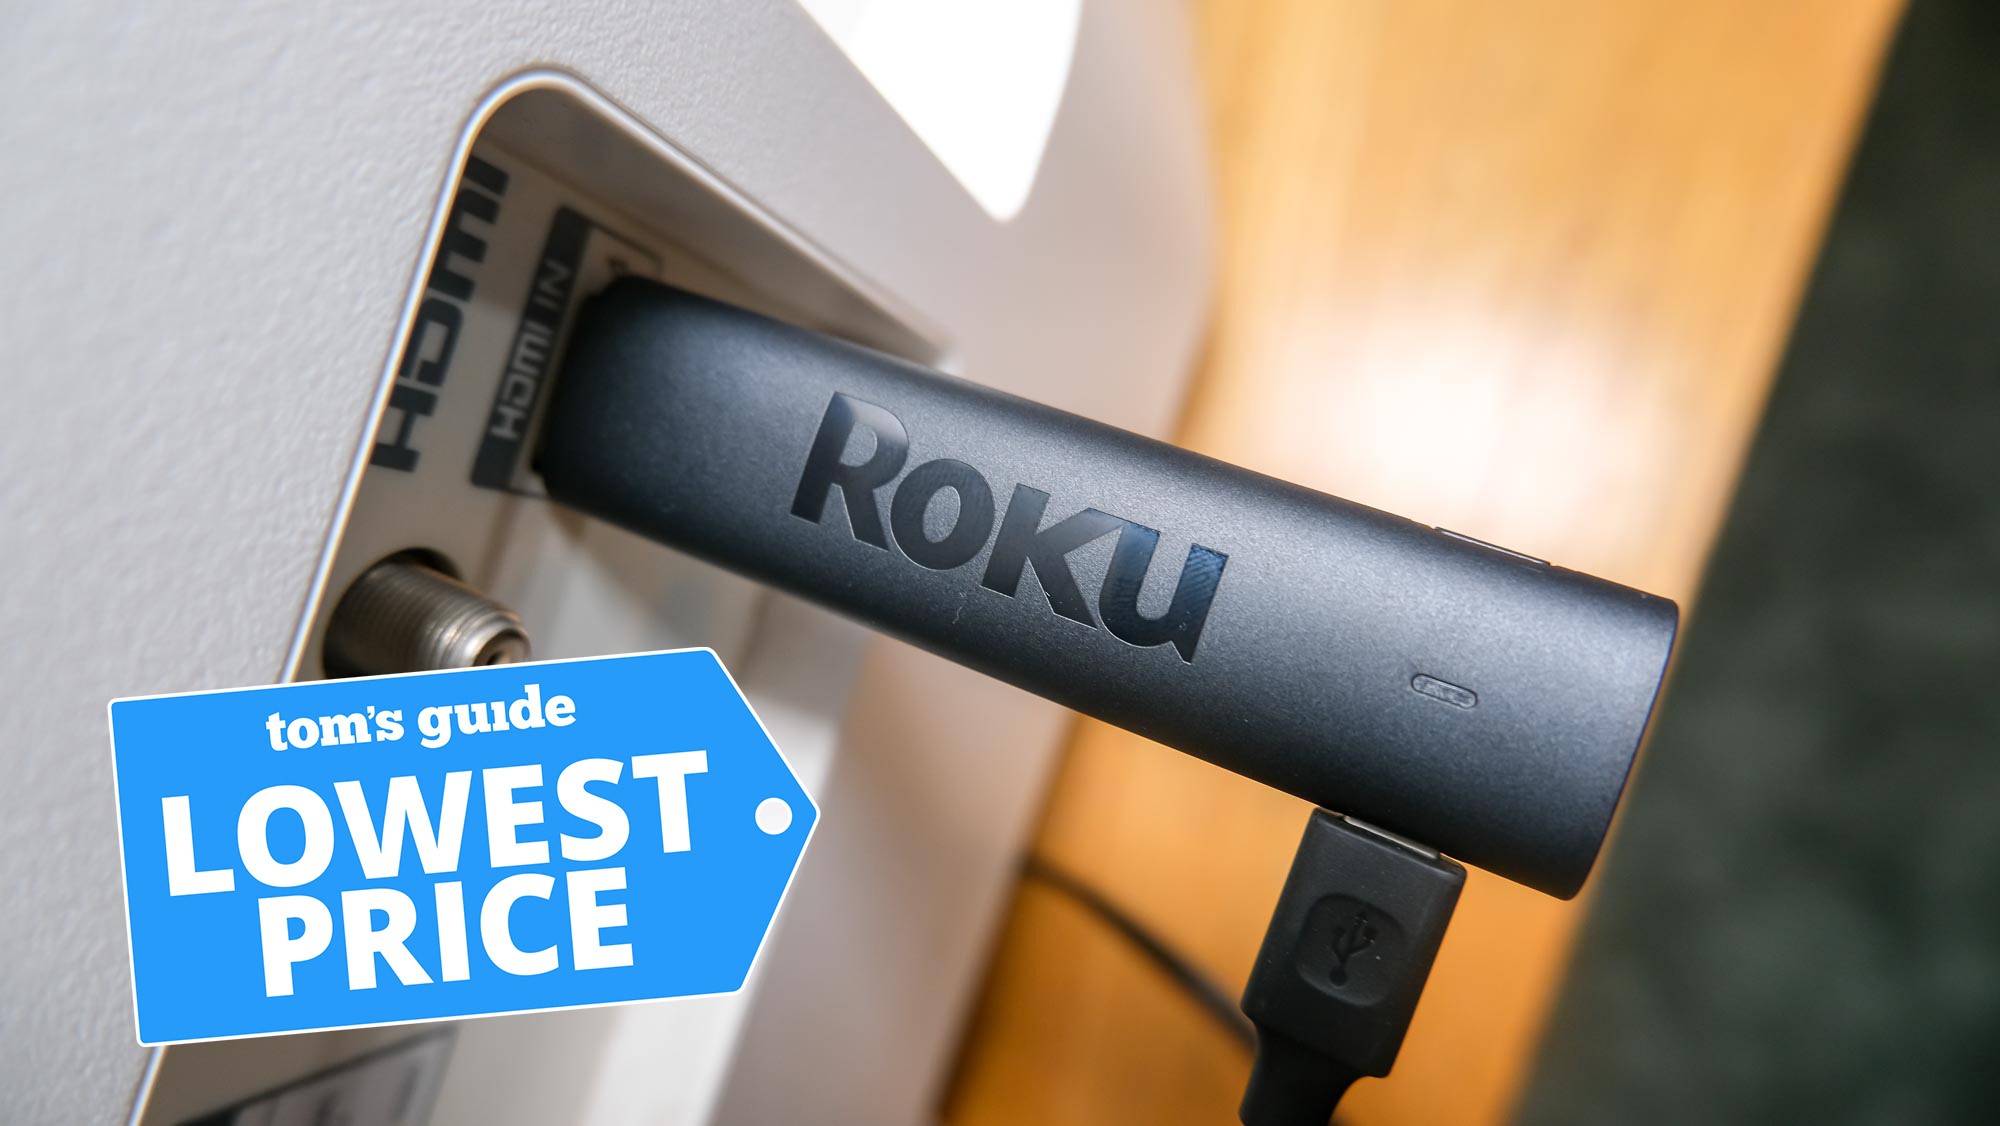 Roku Streaming Stick 4K connected to HDMI port Tom's Guide cheapest graphic above